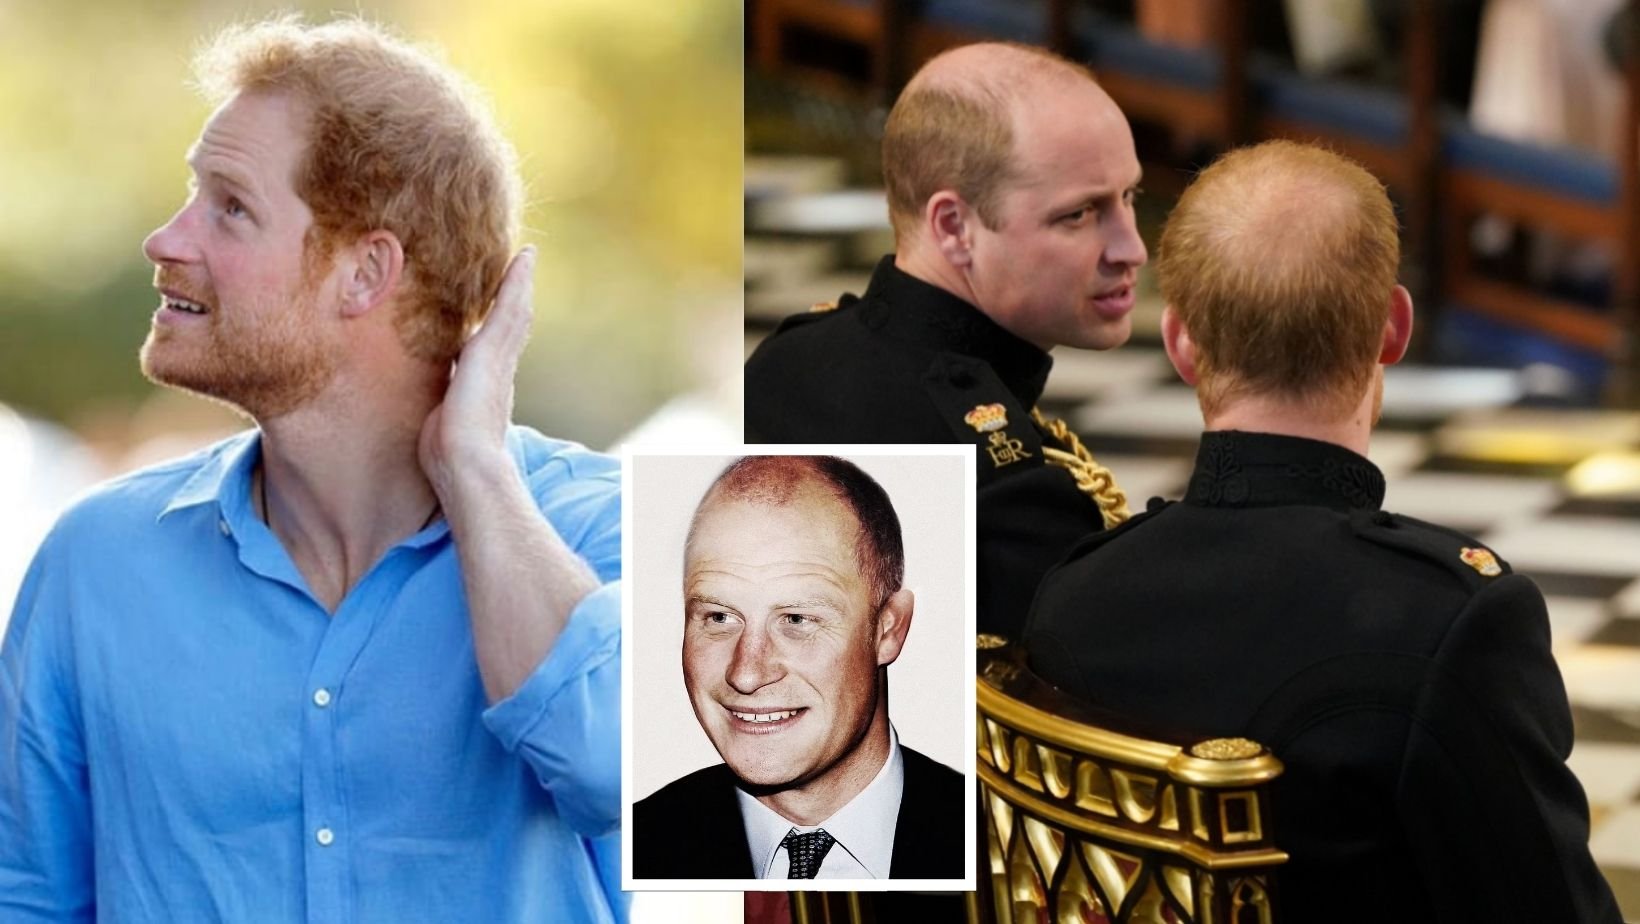 cover 12.jpg?resize=1200,630 - Prince Harry’s Hair Loss Is Getting Worse Since He Moved To The US, Cosmetic Doctor Claims He Will Be Completely Bald At 50